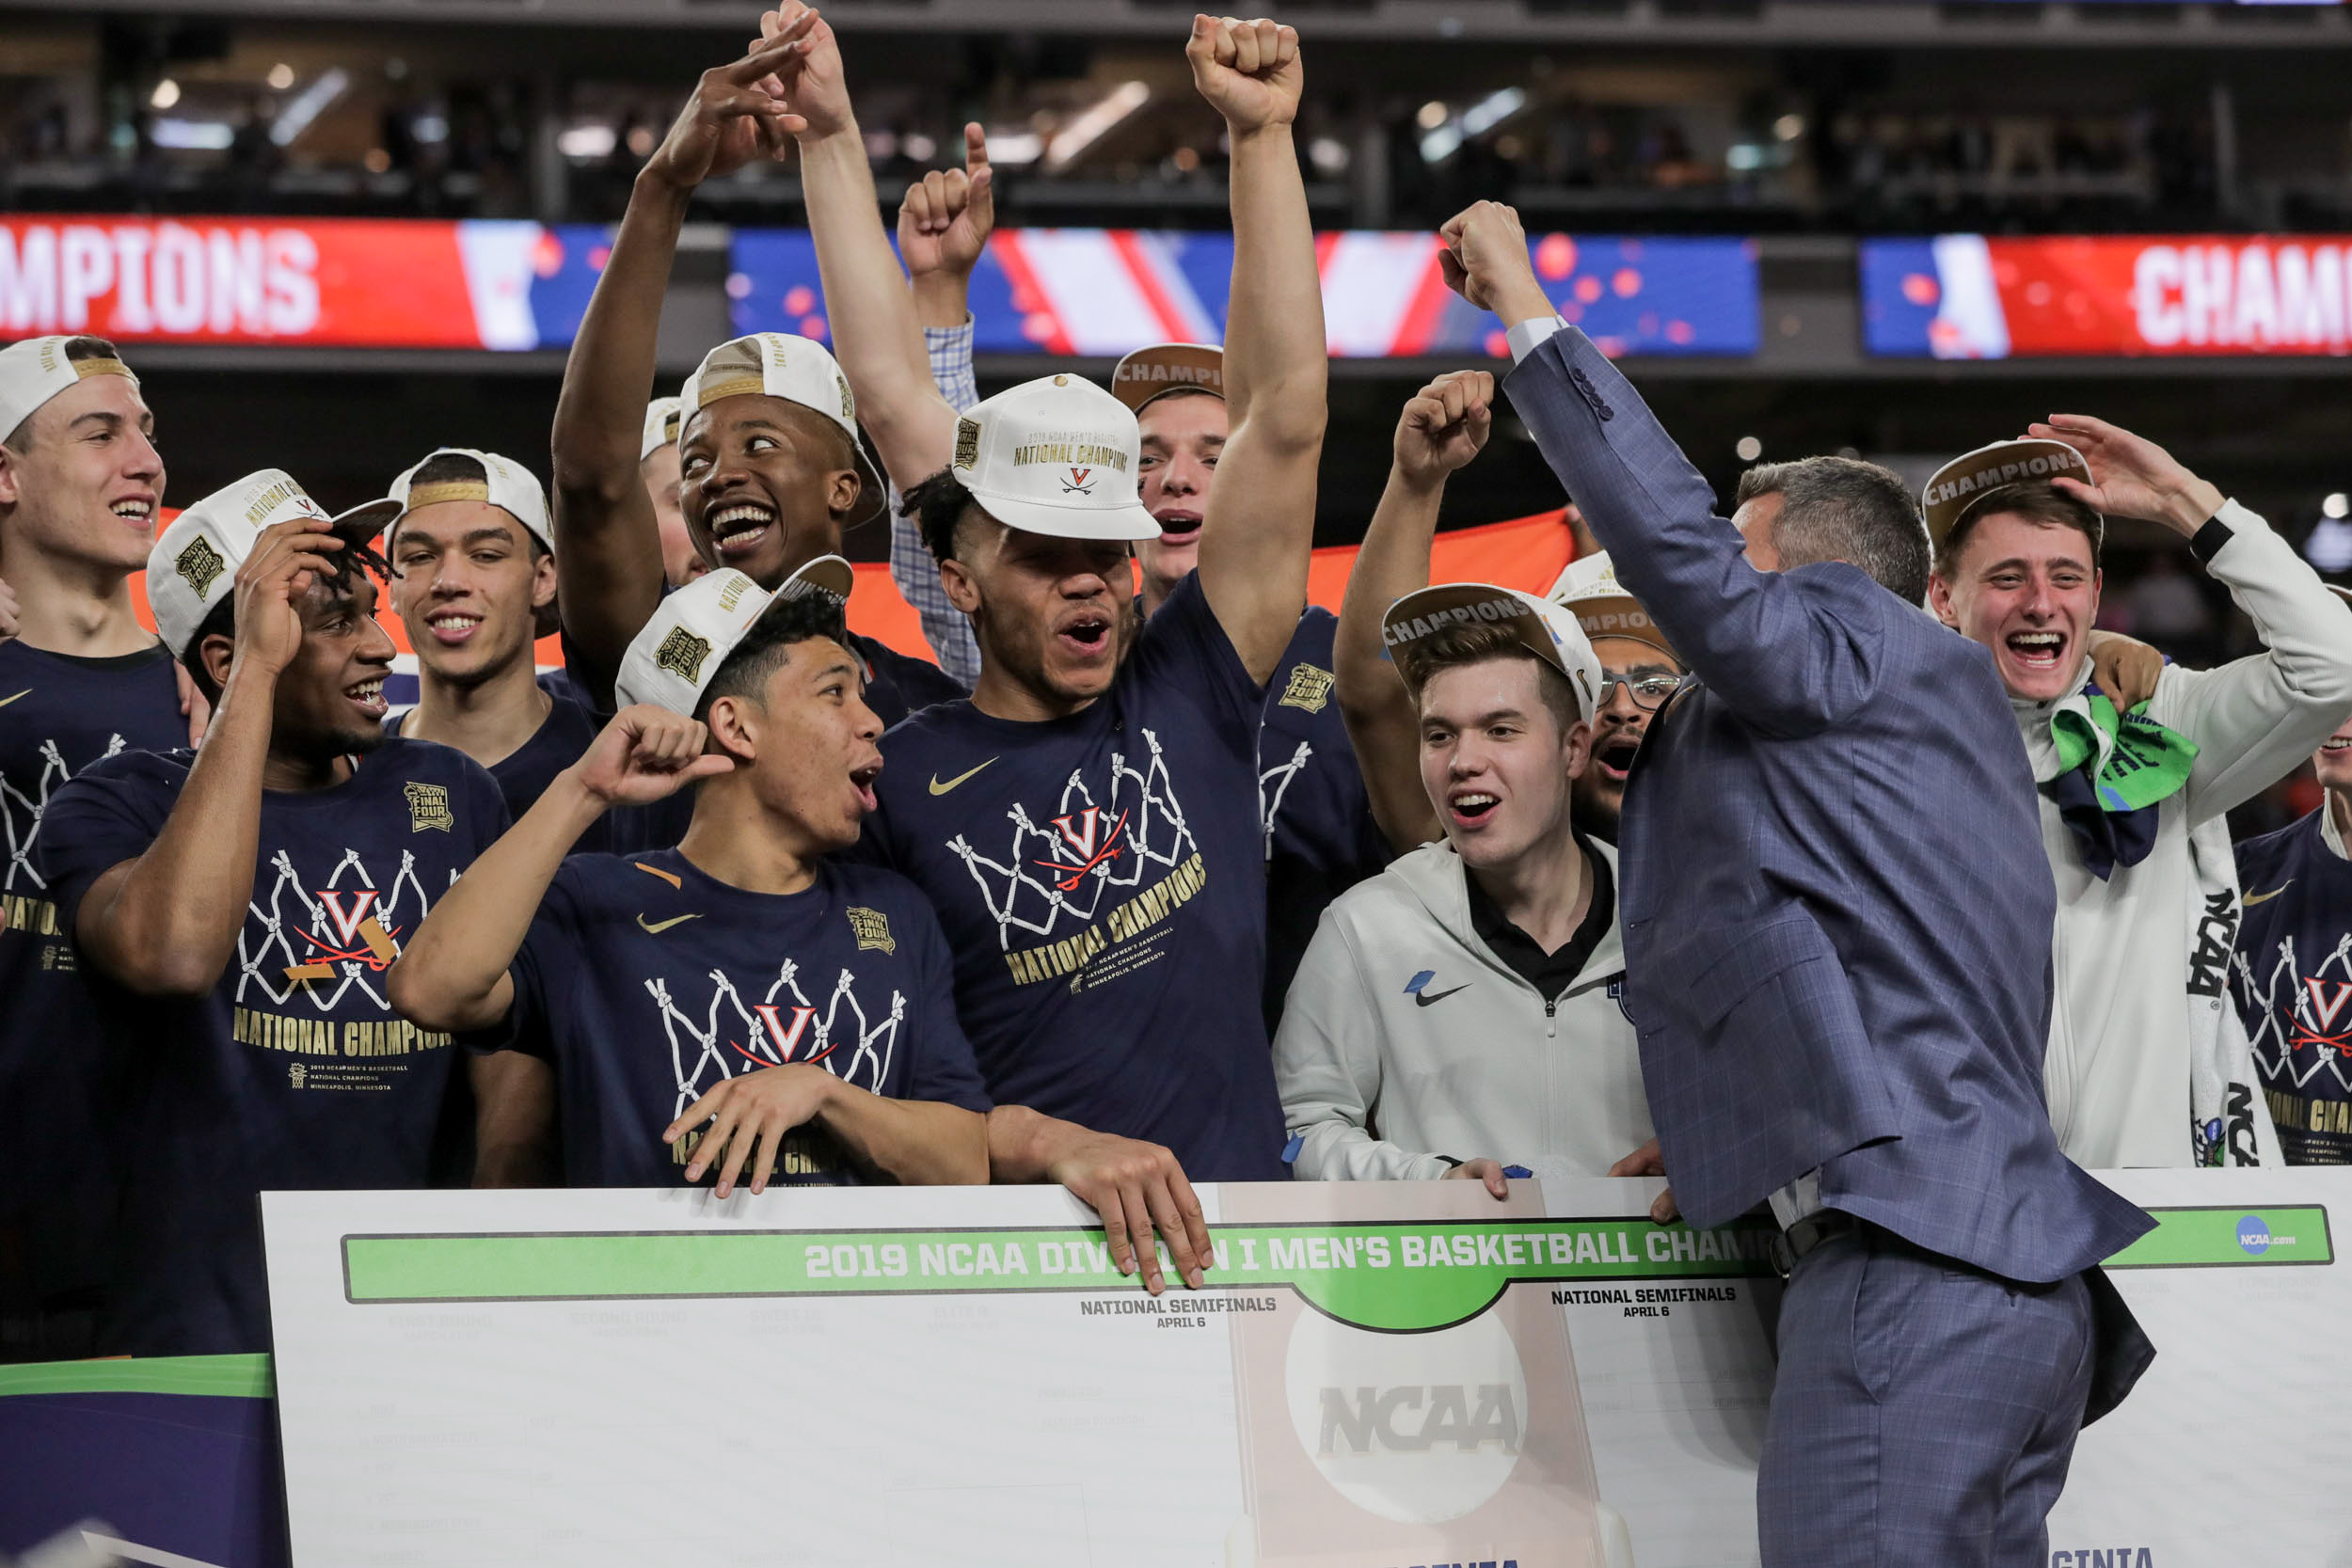 Basketball Team holds large check with Tony Bennett and all of them are cheering and raising their hands